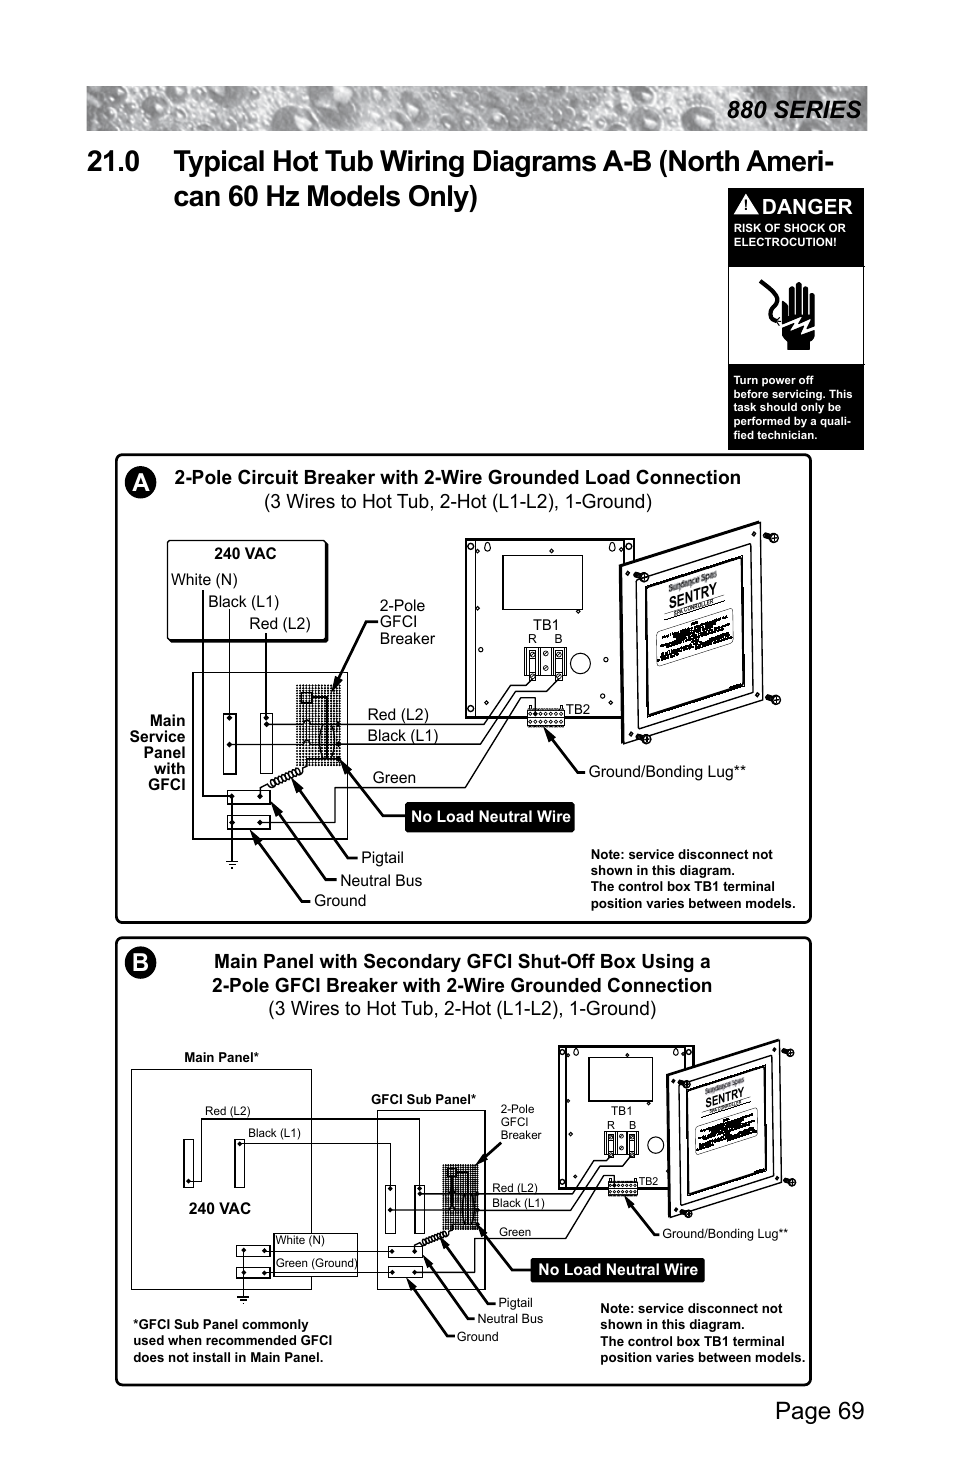 0 typical hot tub wiring diagrams a-b, North american 60 hz models only), Danger | Sundance Spas ALTAMAR 880 User Manual | Page 75 / 92